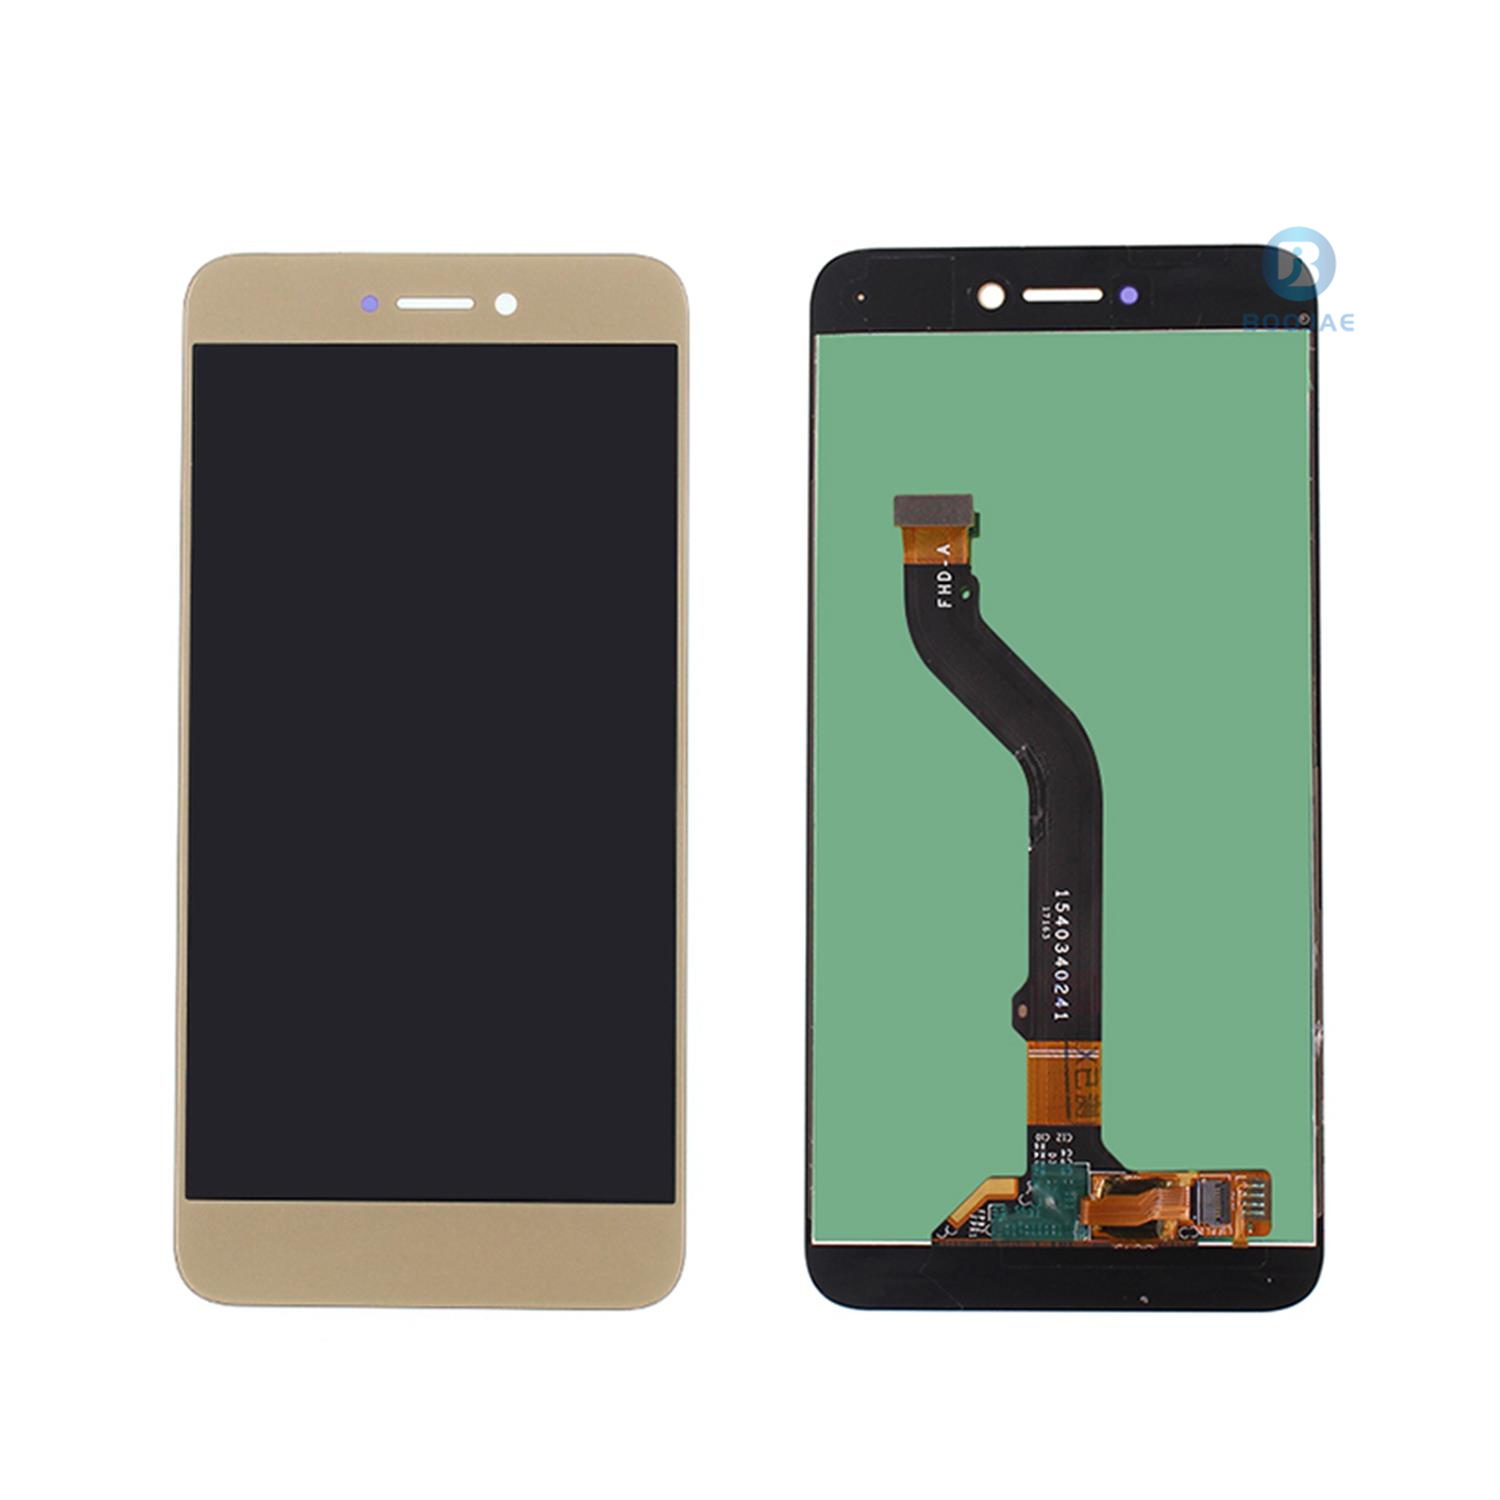 Huawei P9 Lite 2017 LCD Screen Display and Touch Panel Digitizer Assembly Replacement